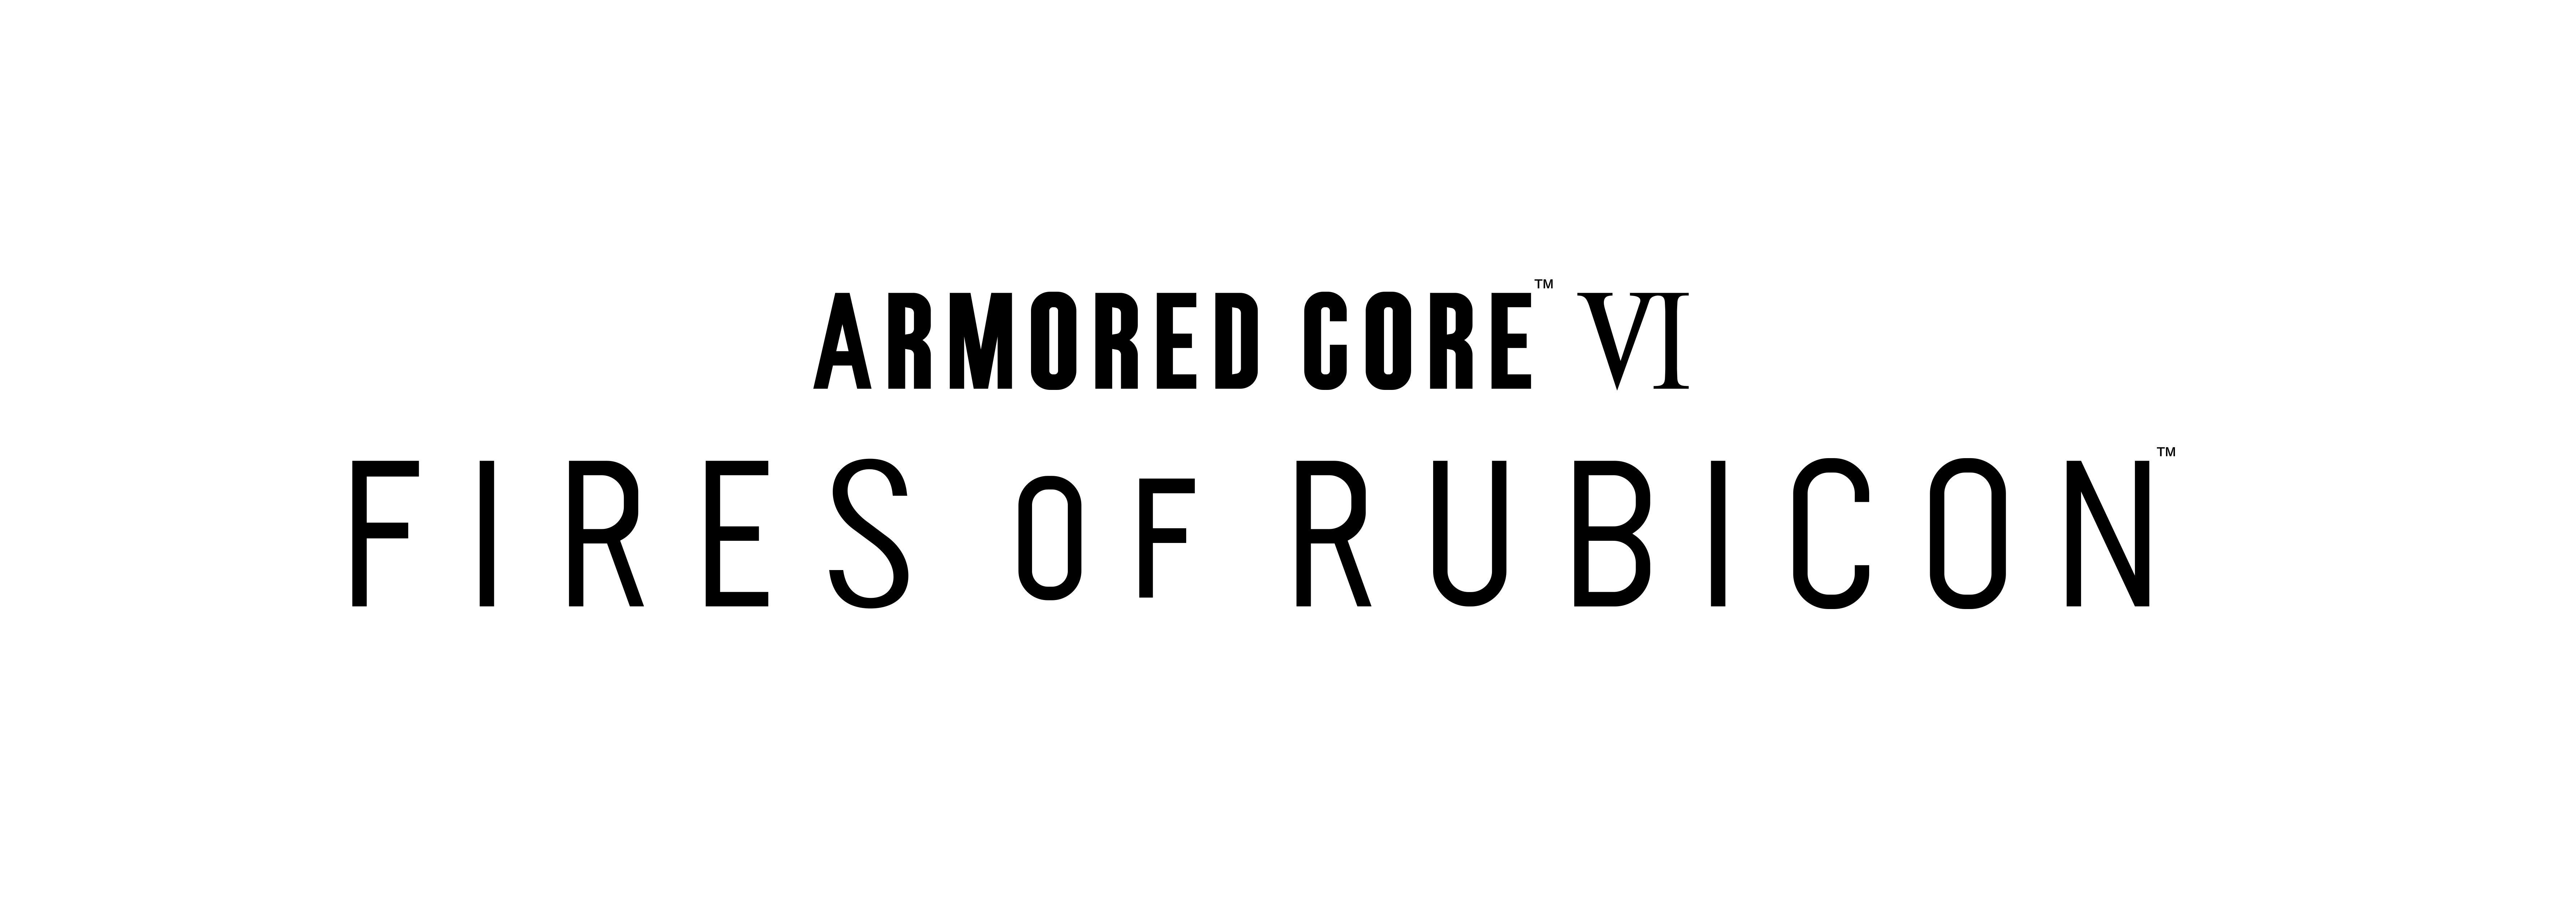 armored core psx